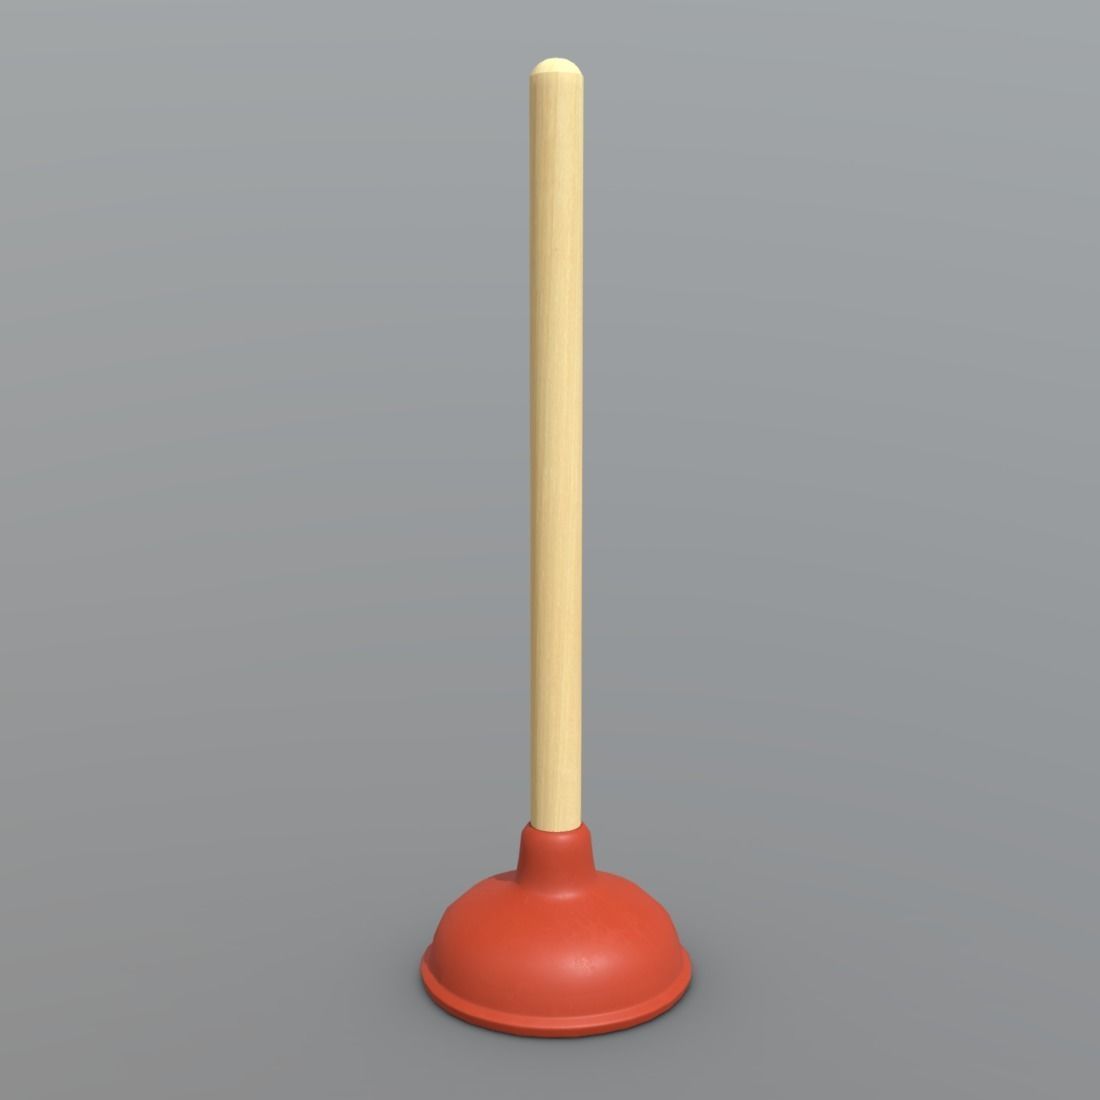 Plunger to unclog drains